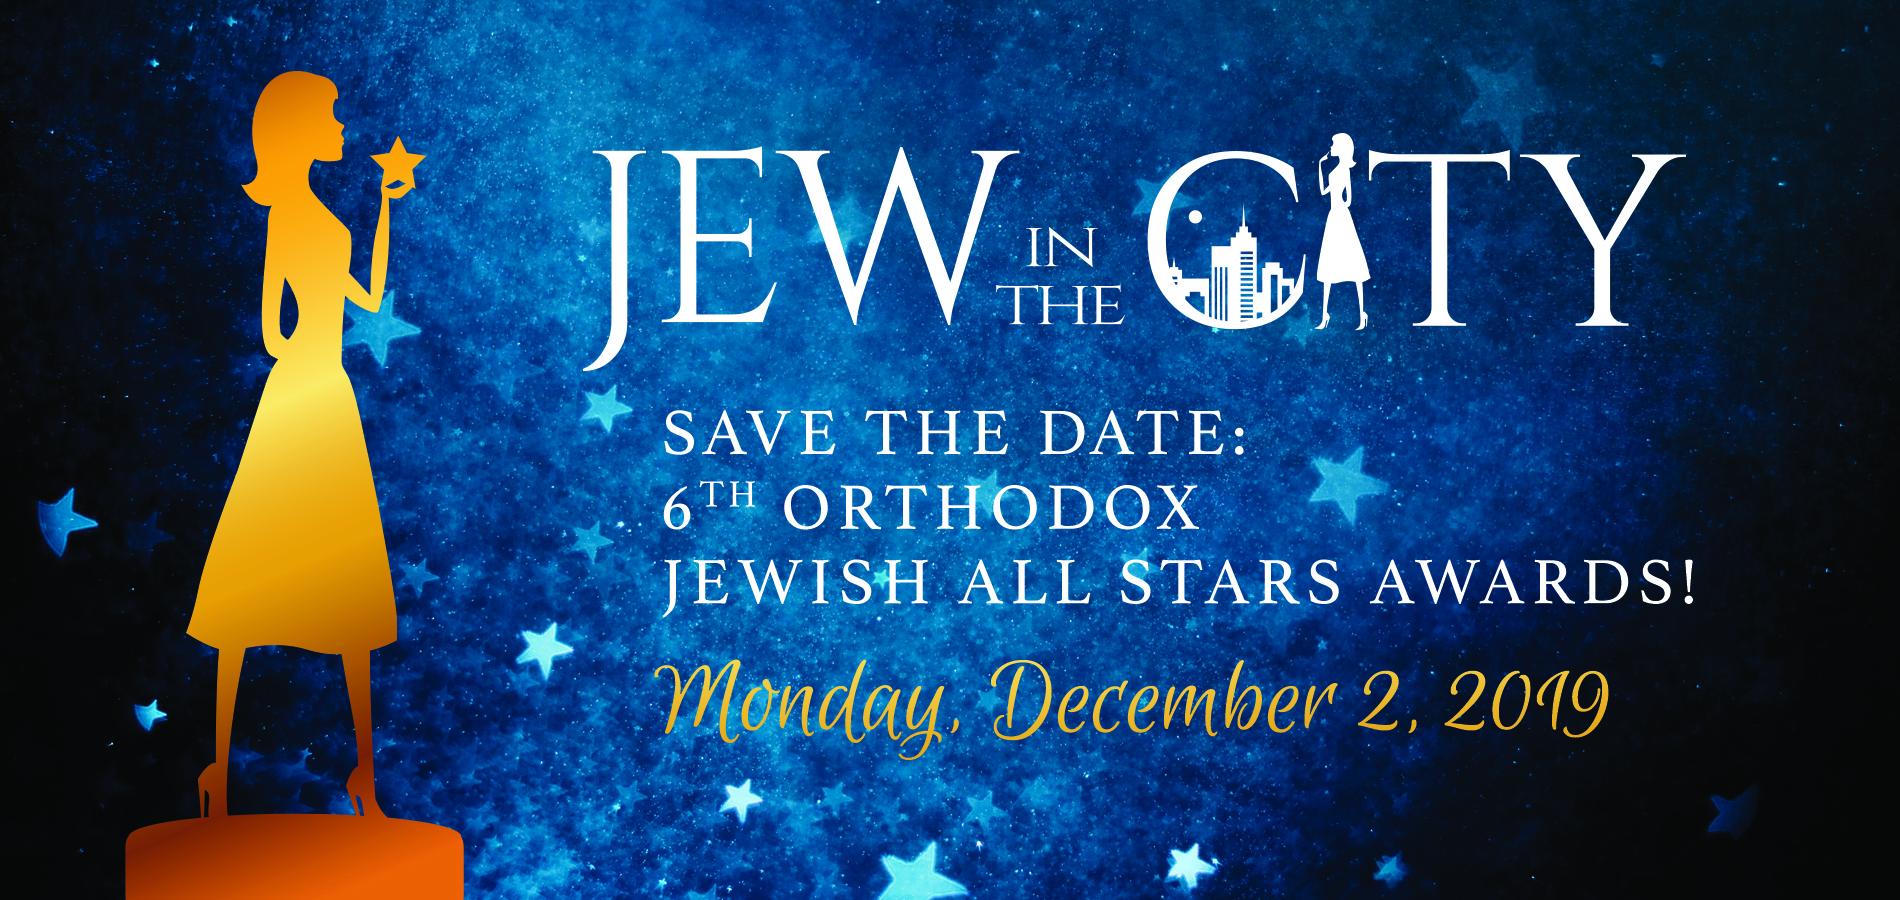 Save The Date For The 6th Orthodox Jewish All Stars Event - 